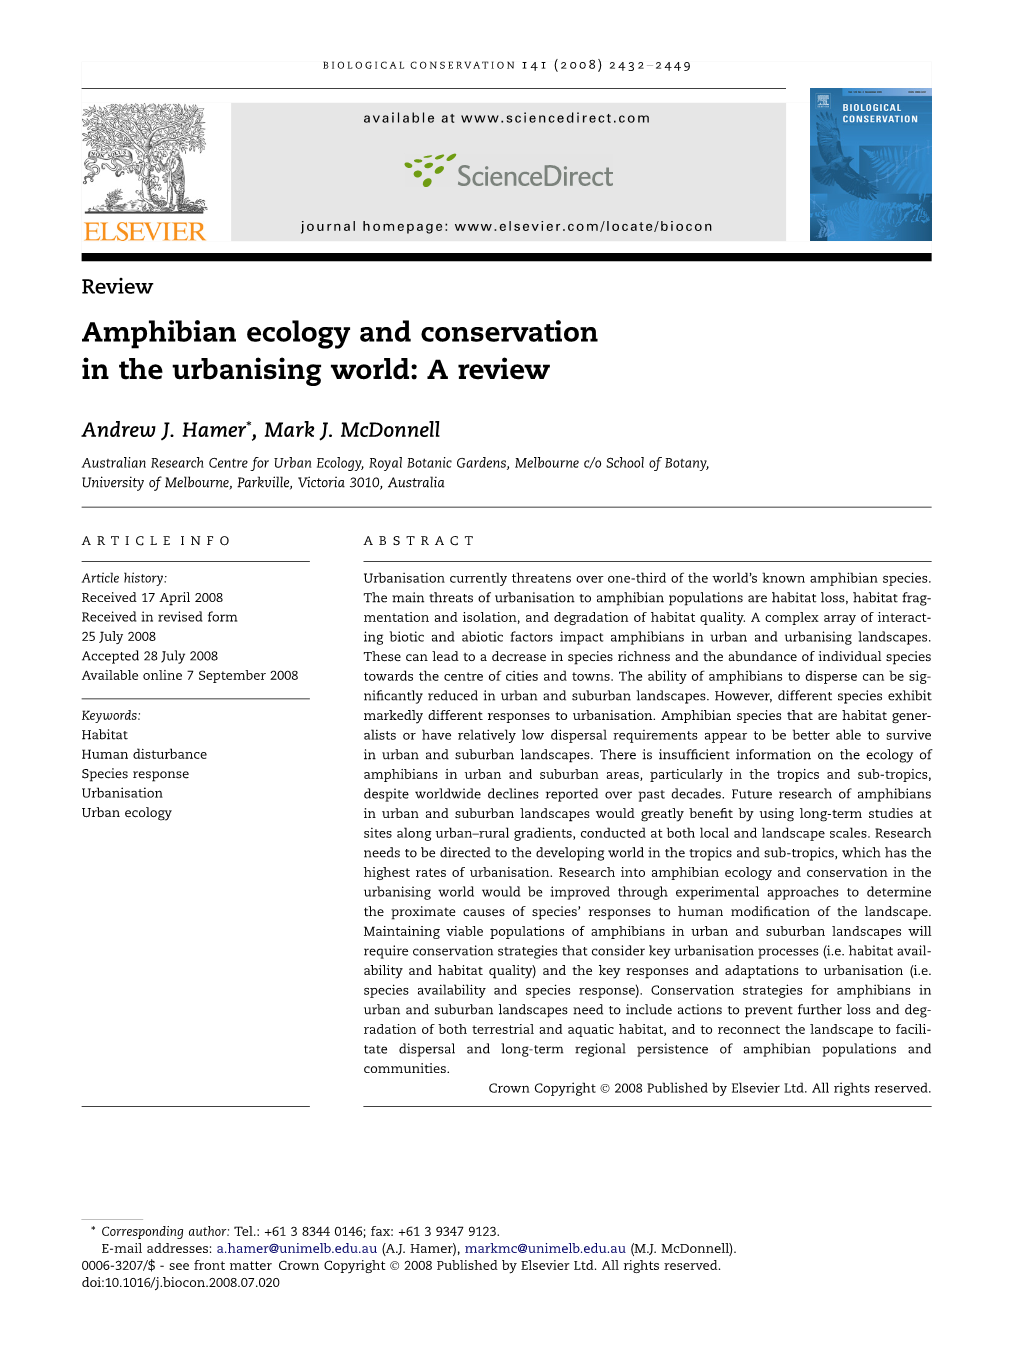 Amphibian Ecology and Conservation in the Urbanising World: a Review